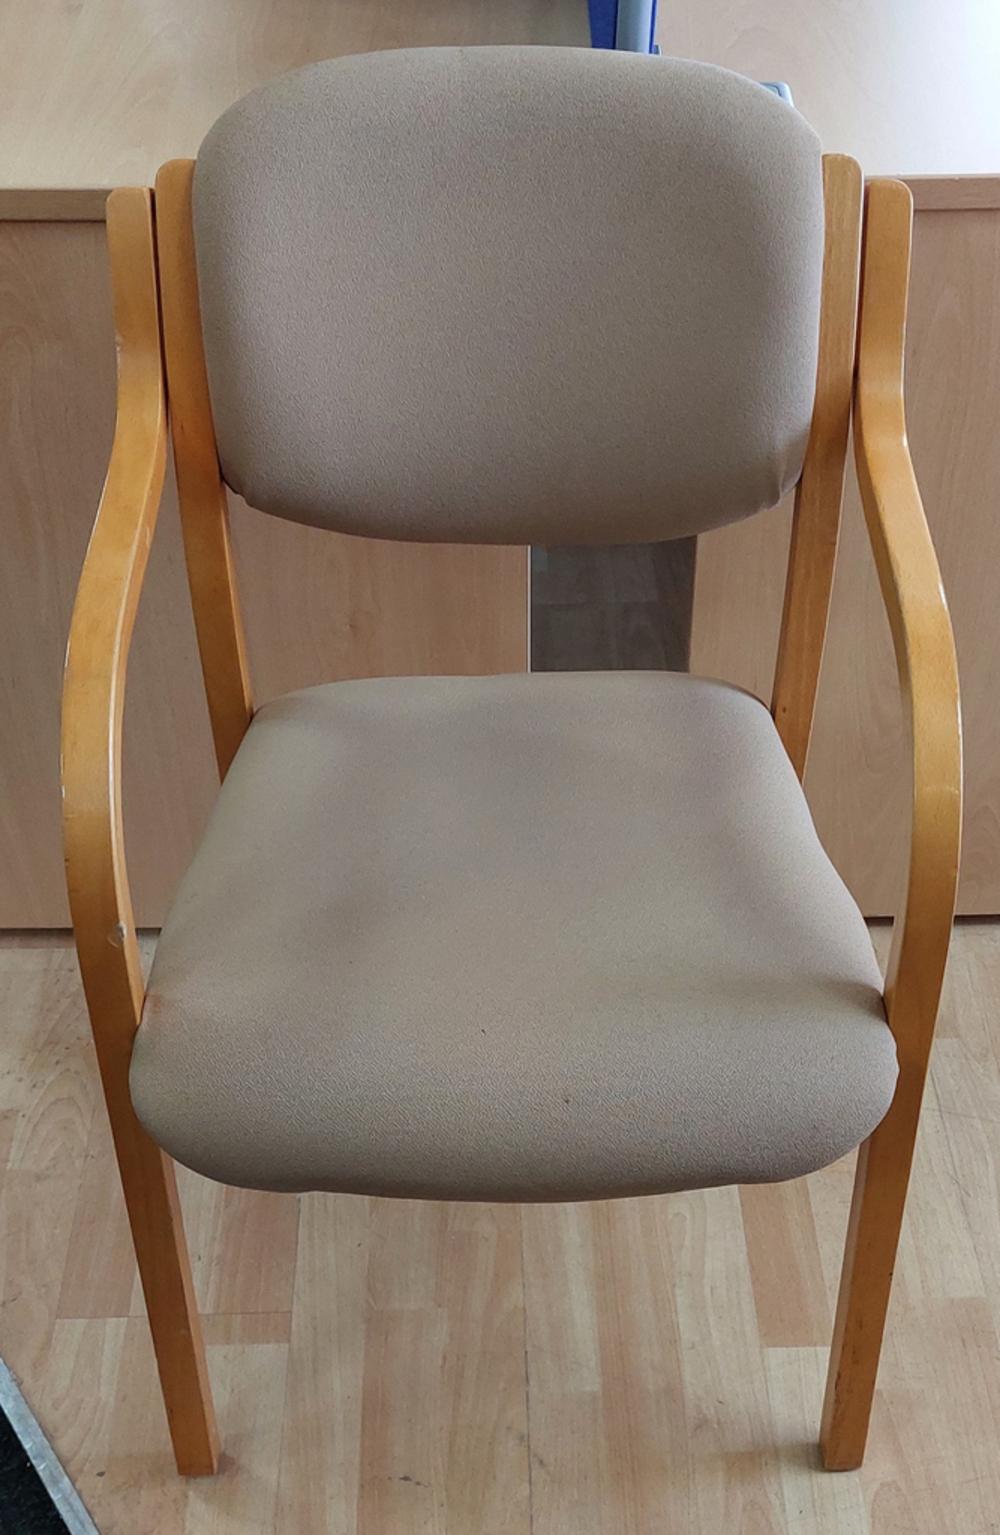 Sandvale Stacking Arm Chair with Wooden Frame